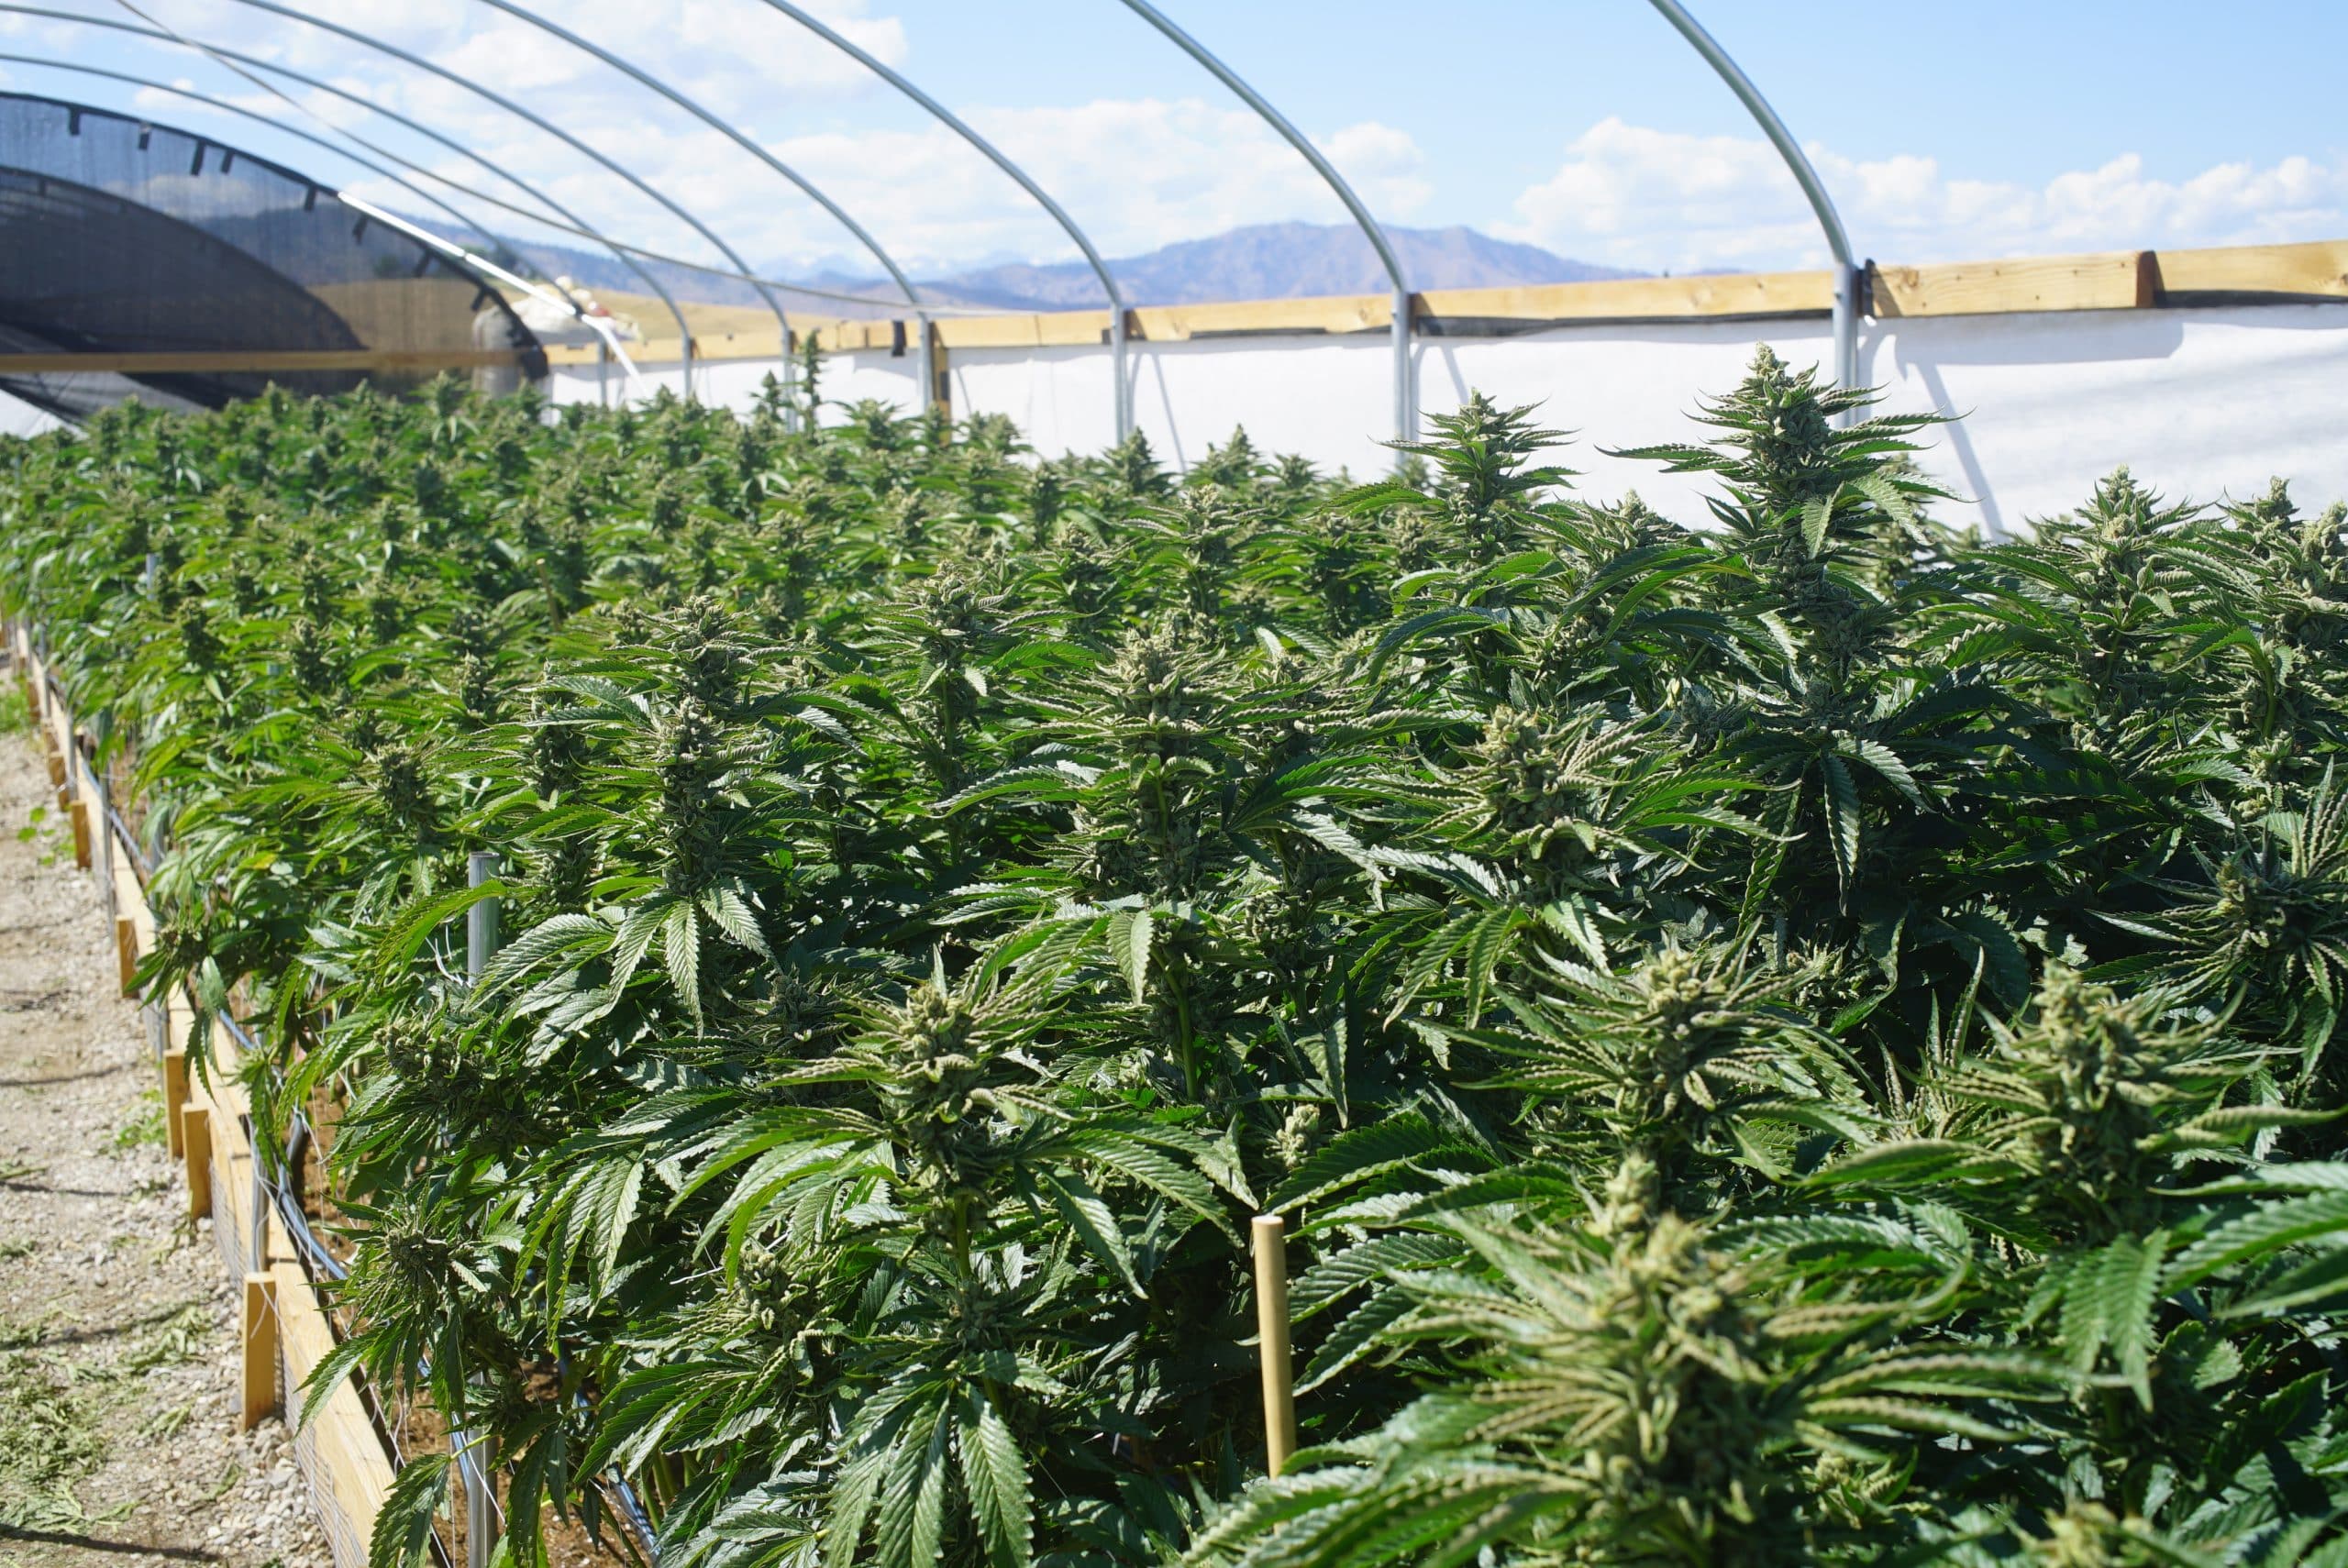 Growing cannabis in a polytunnel greenhouse